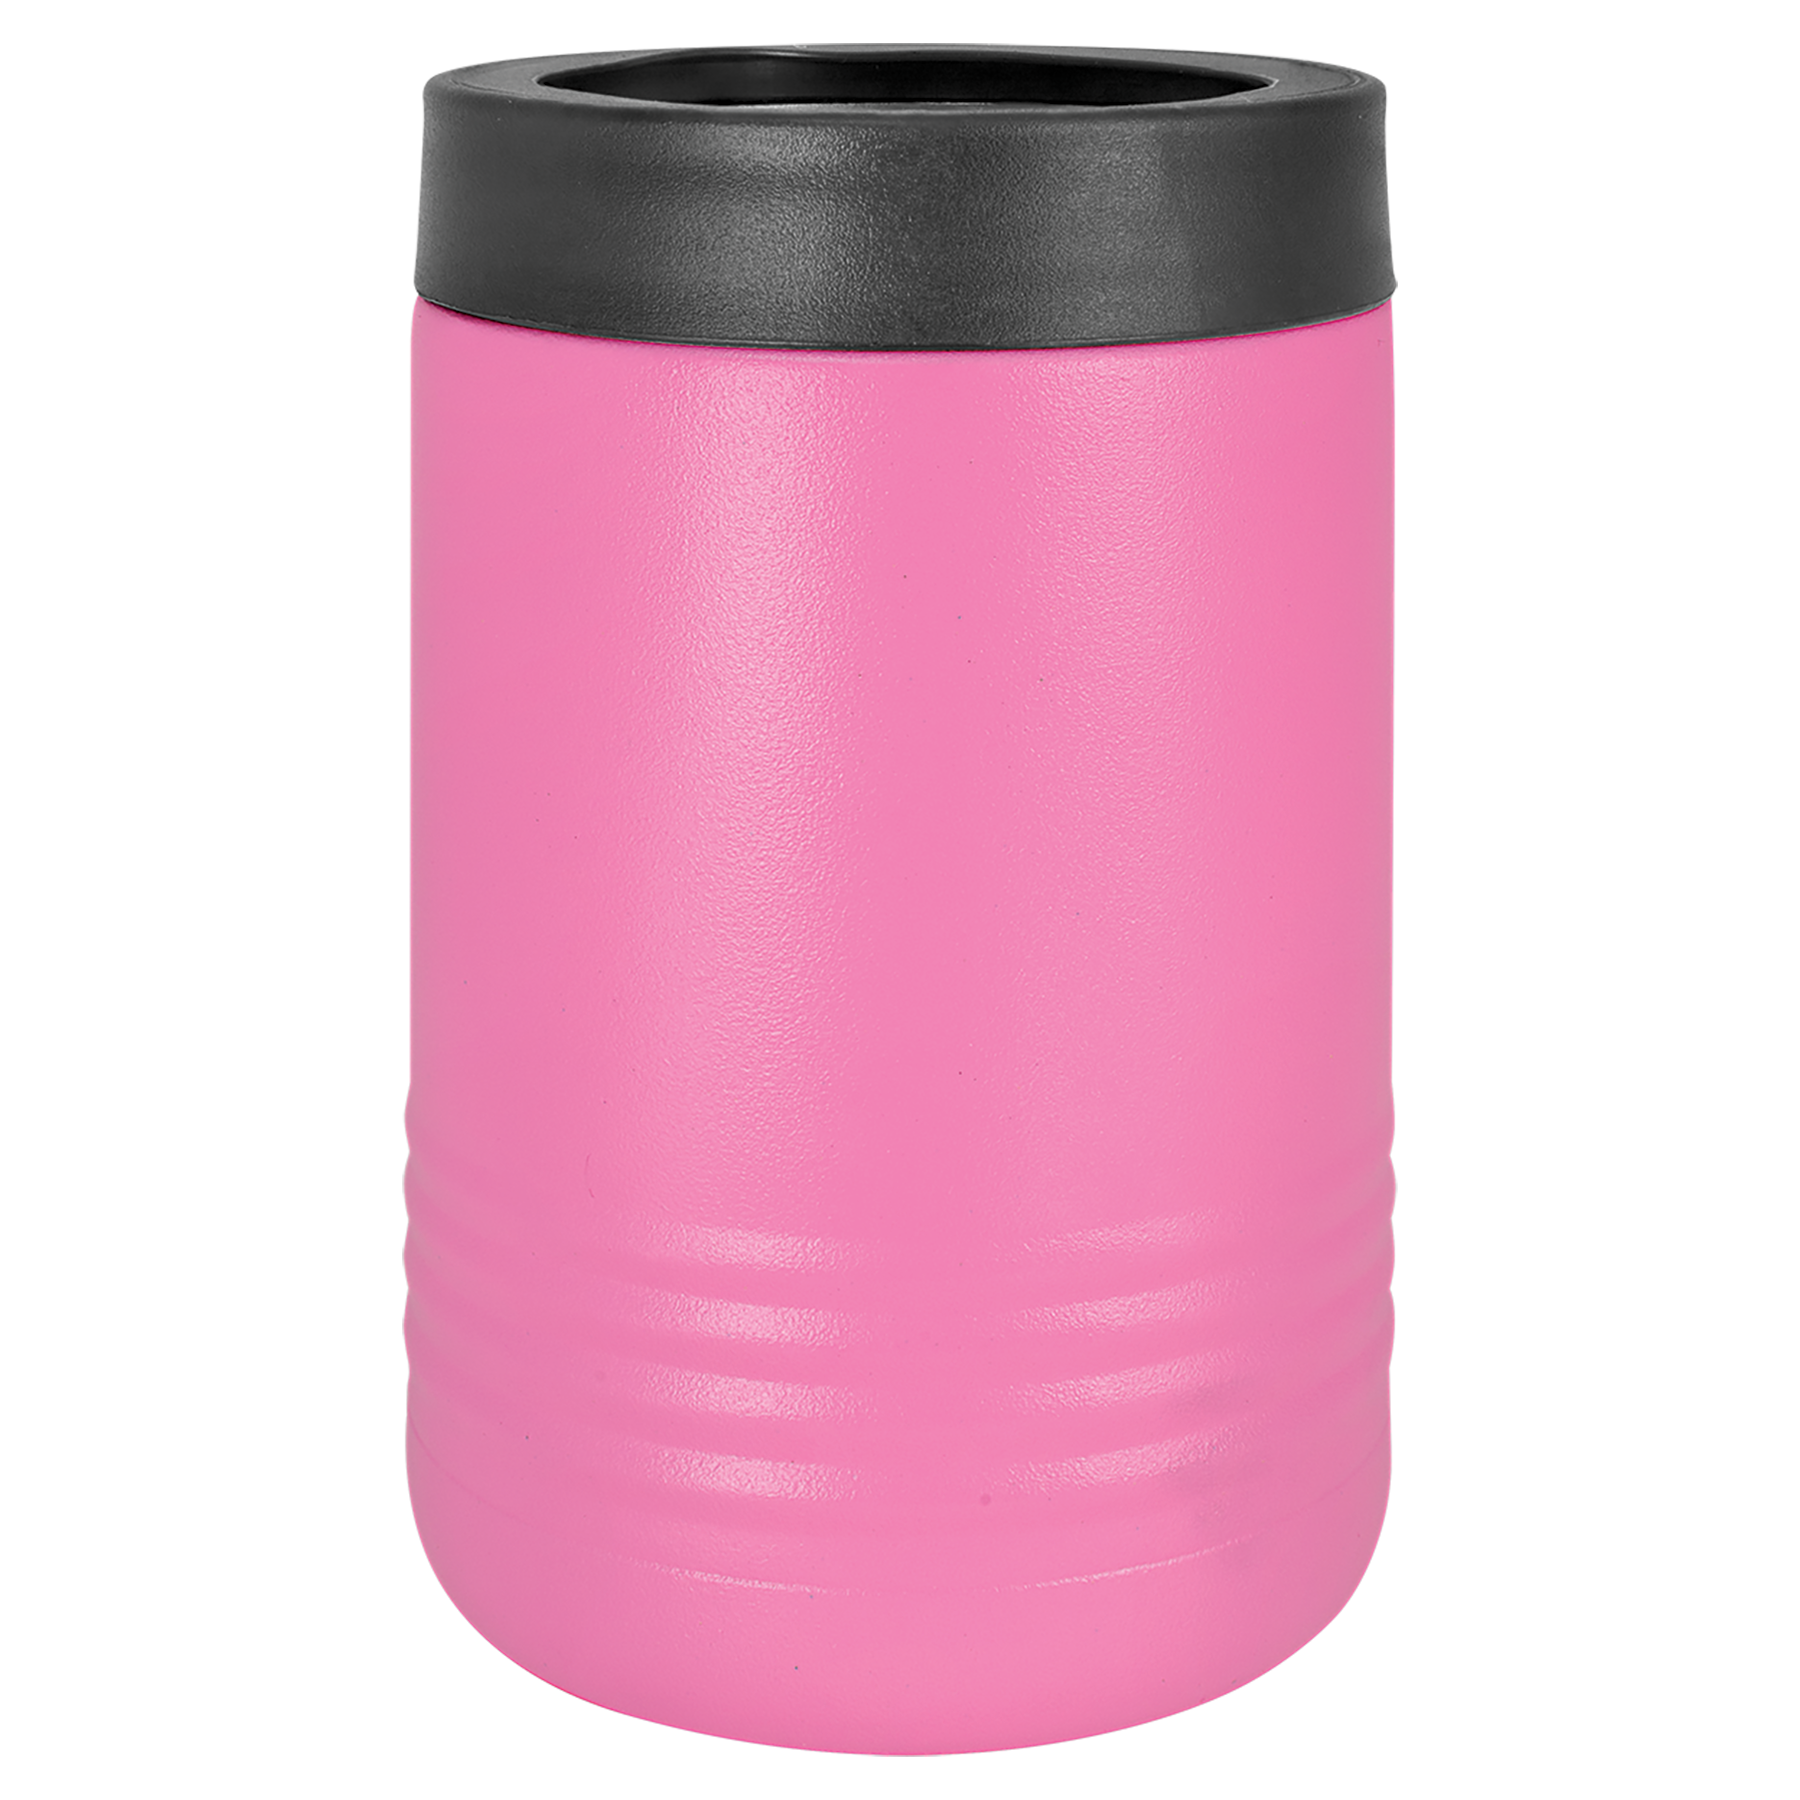 Pink Beverage Holder-One Free Engraving -Double-wall Vacuum Insulated -Made from 18/8 Gauge Stainless Steel (Type 304 Food Grade) -Fits most 12oz and 16oz Cans and 12oz Bottles -Not recommended for Dishwasher -Works with Cold and Hot Drinks -18 Color Options -Perfect for Personalized Gifts, Awards, Incentives, Swag & Fundraisers